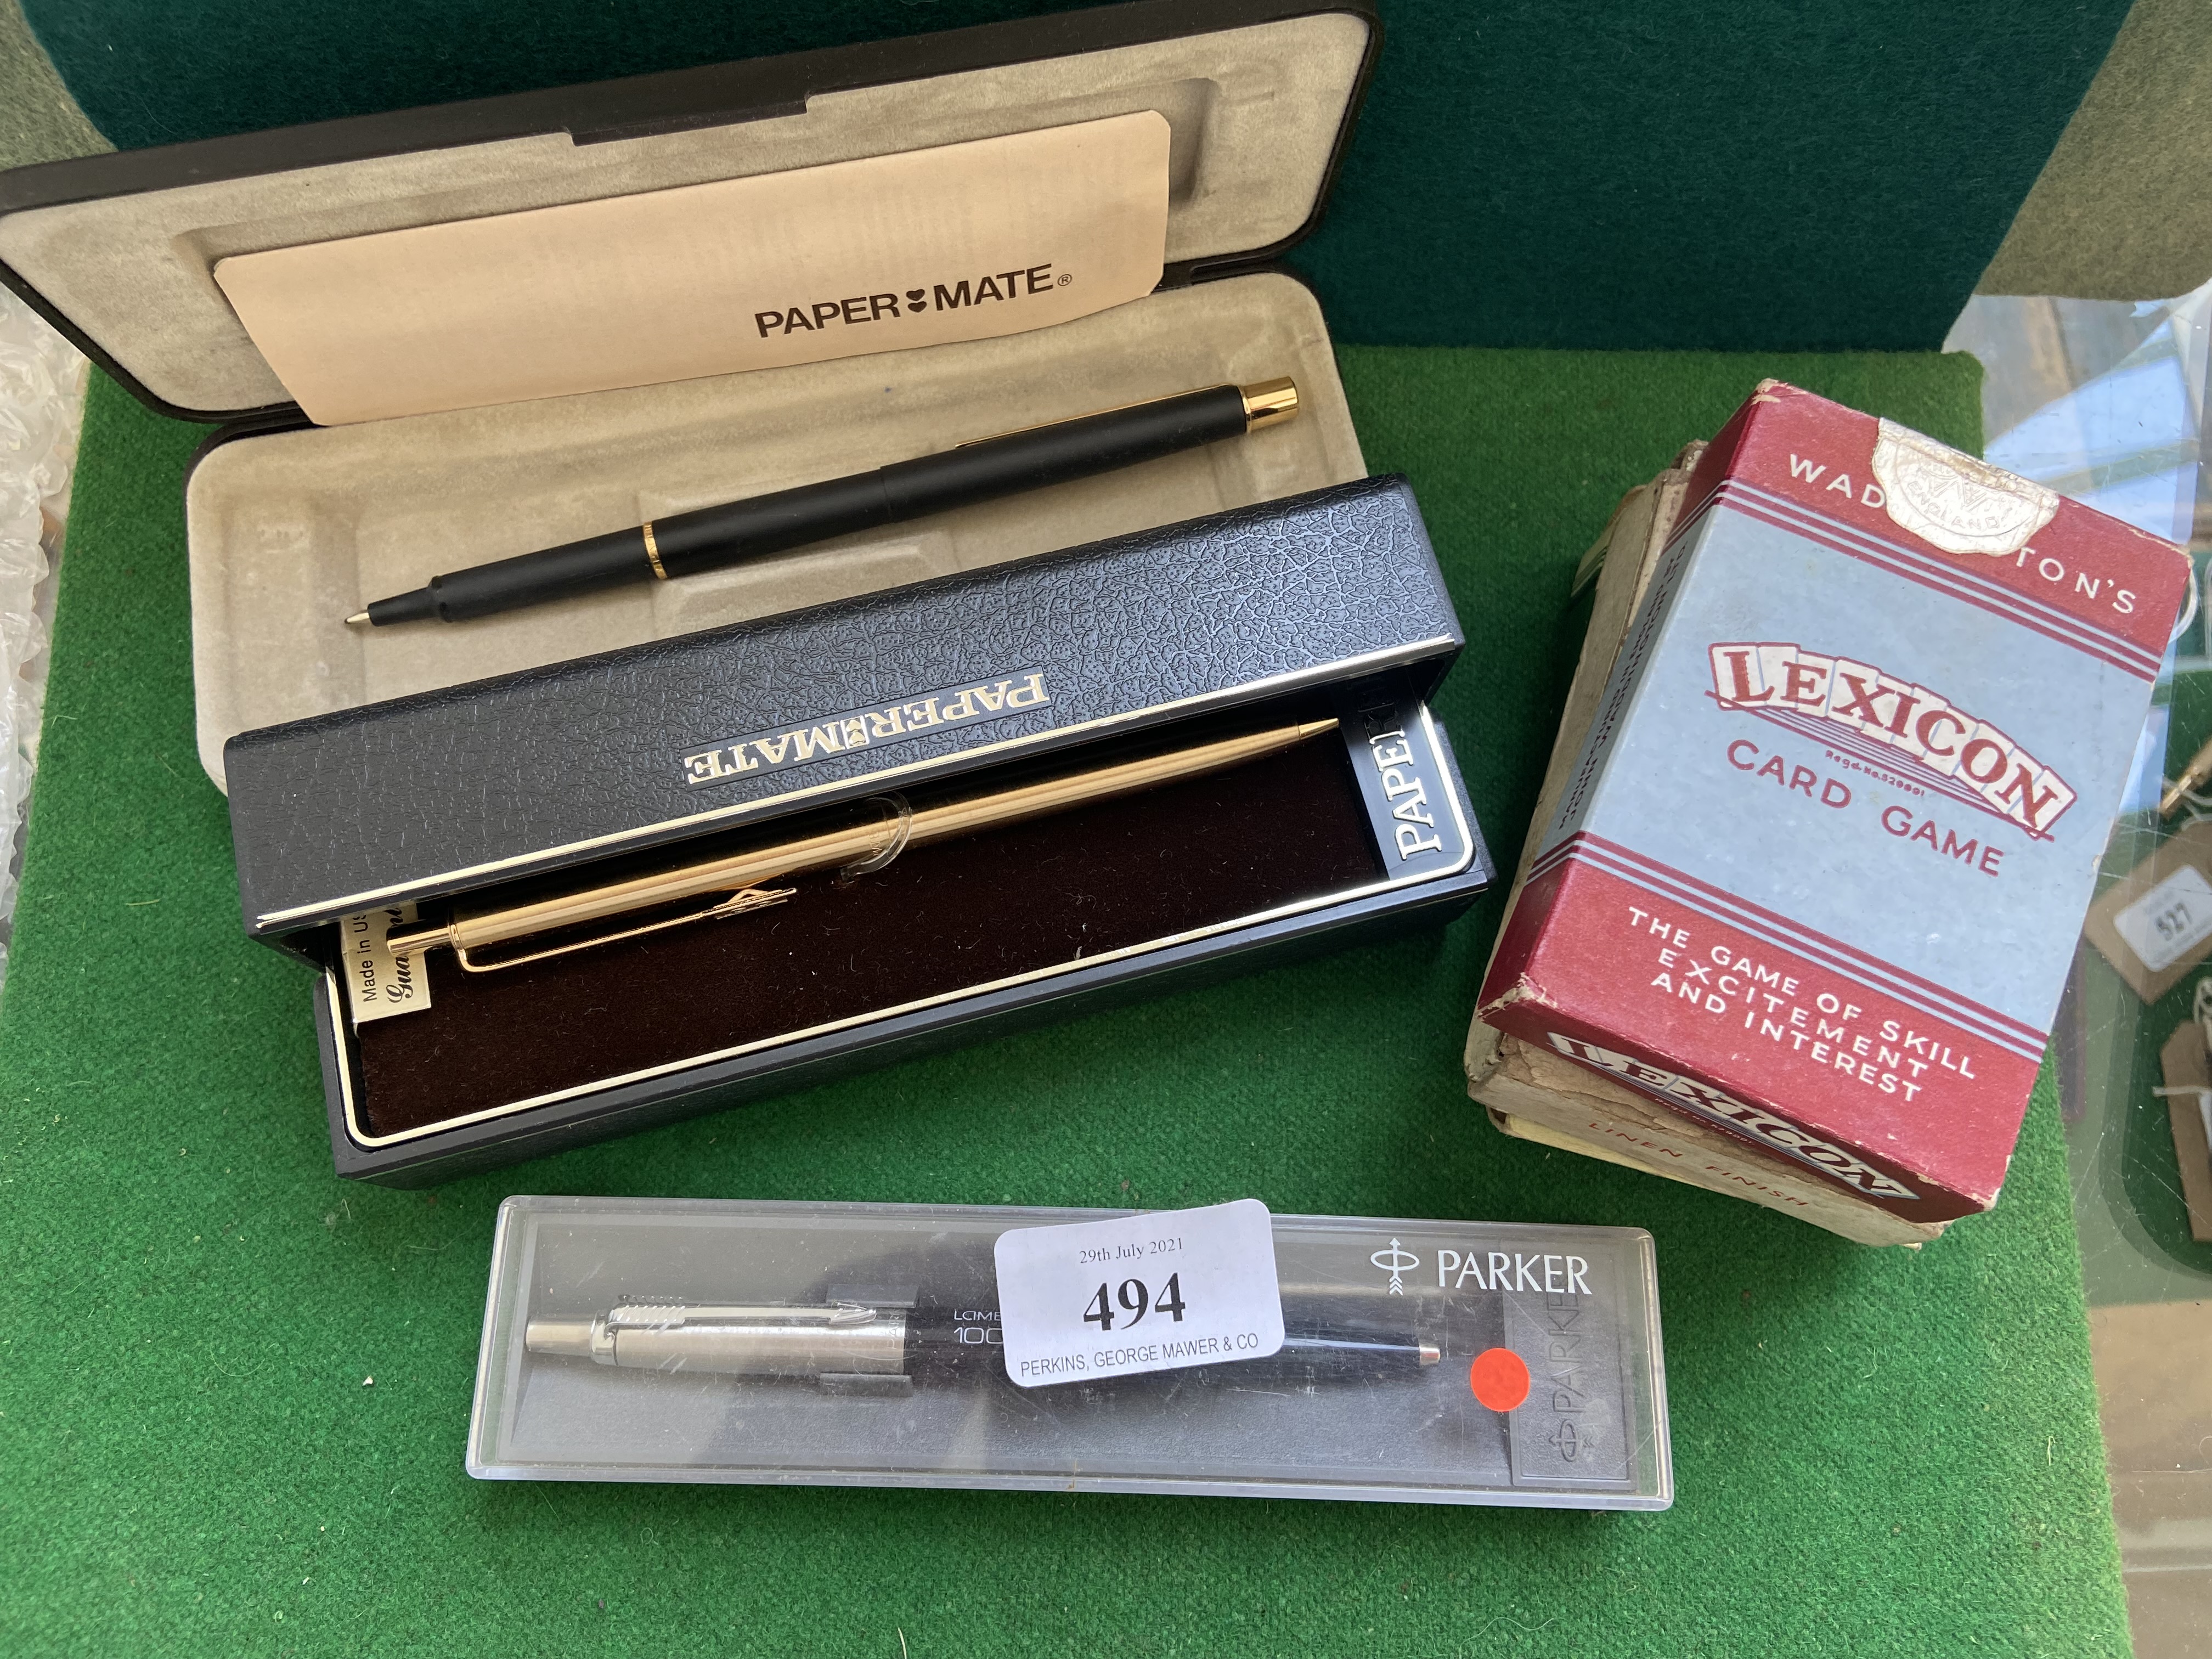 2 Paperweight pens and an unused Lambert & Butler Parker biro in original boxes and 3 sets of